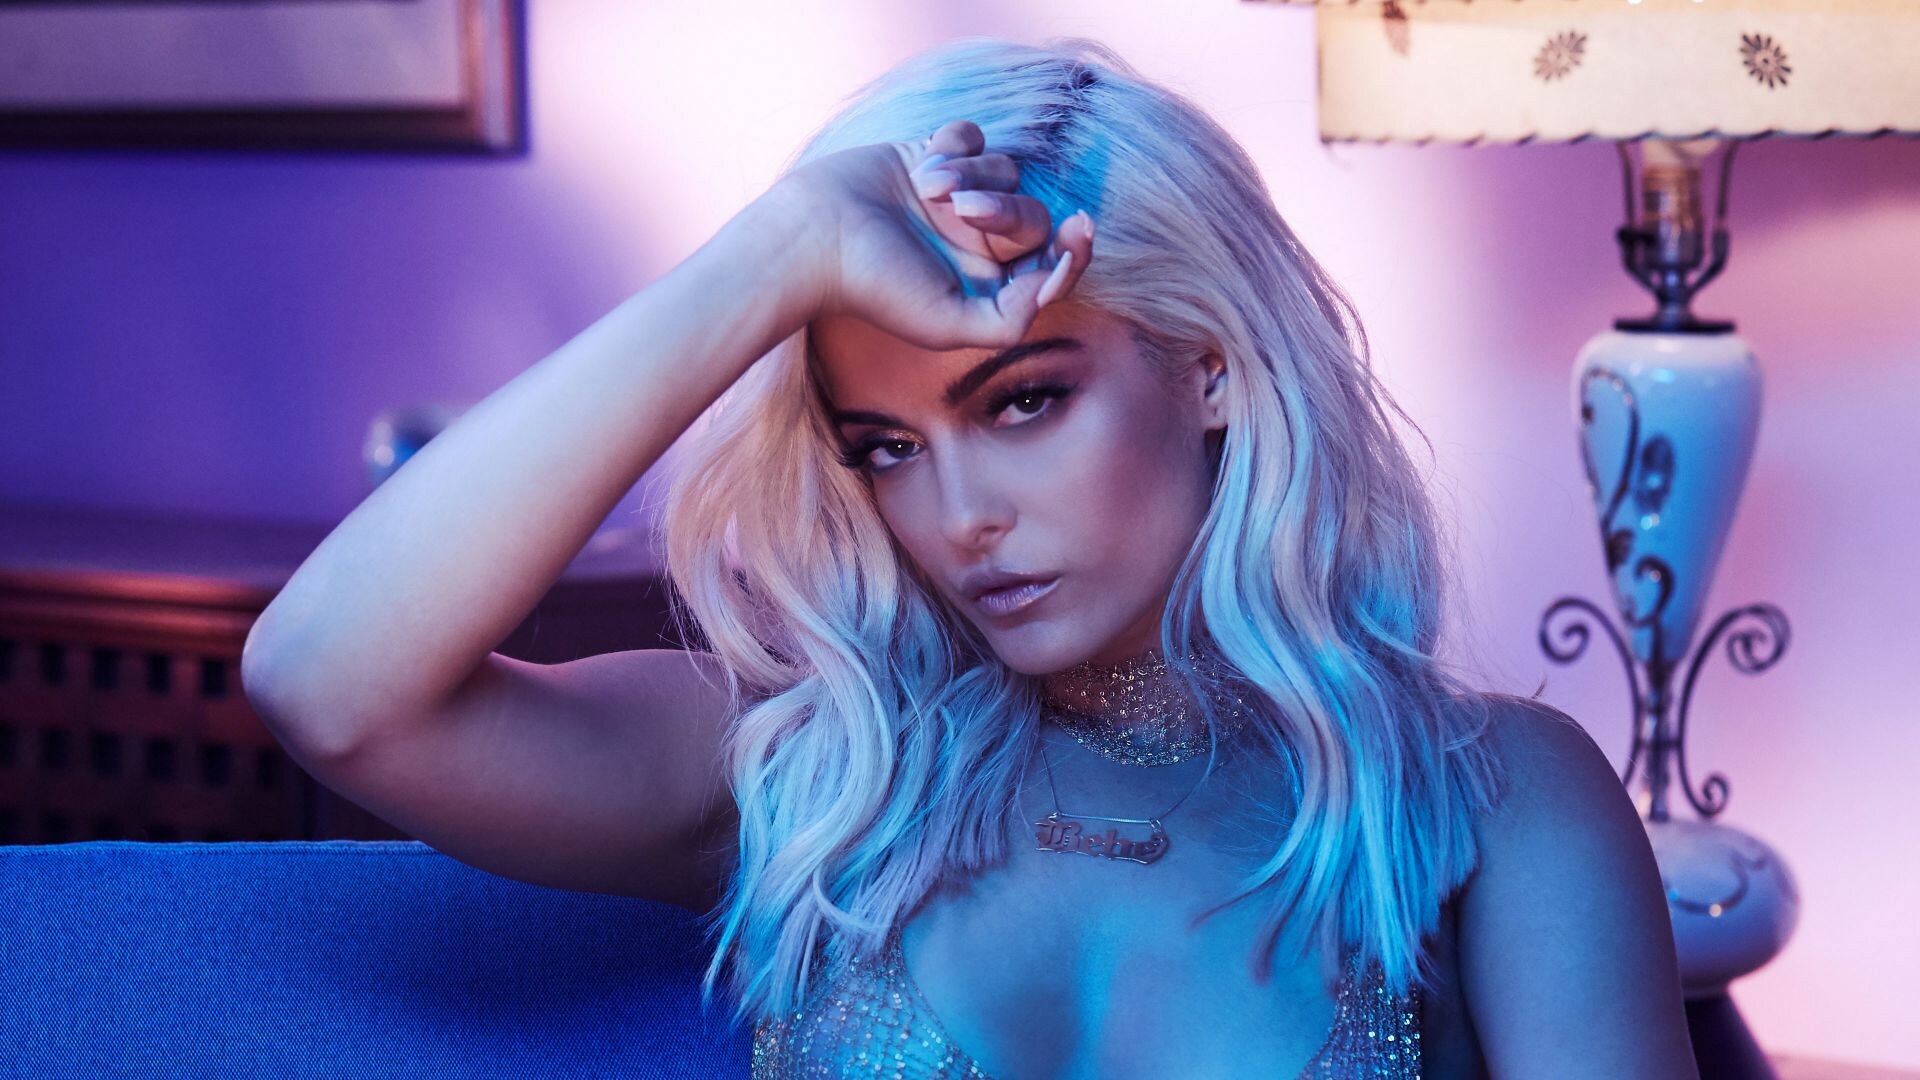 Bebe Rexha: The singer released an accessory line with Puma titled "Bebe X Puma" in March 2021. 1920x1080 Full HD Background.